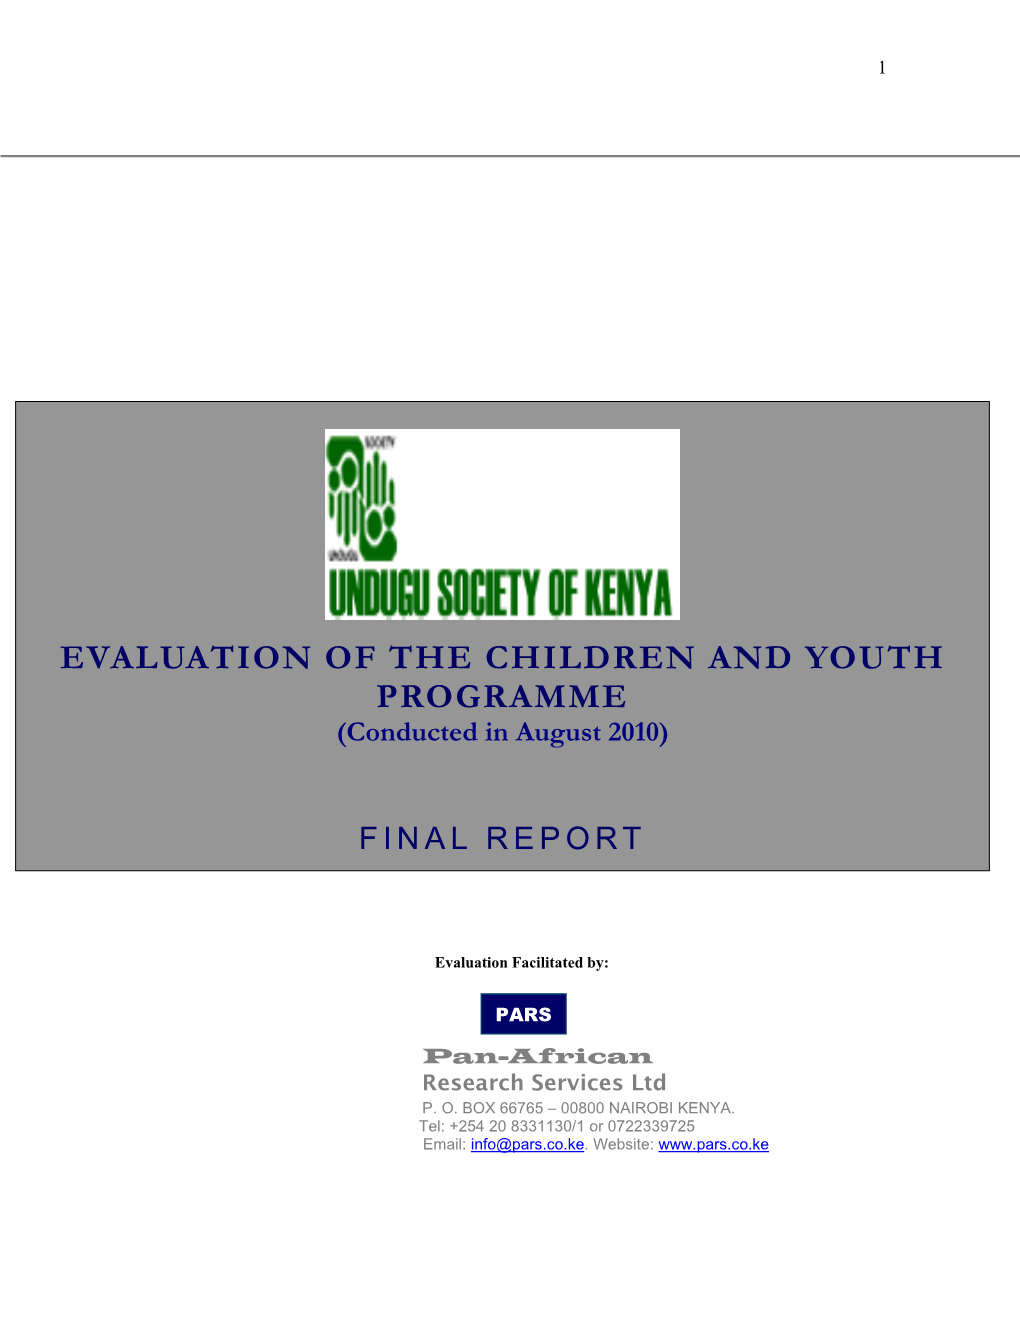 EVALUATION of the CHILDREN and YOUTH PROGRAMME (Conducted in August 2010)